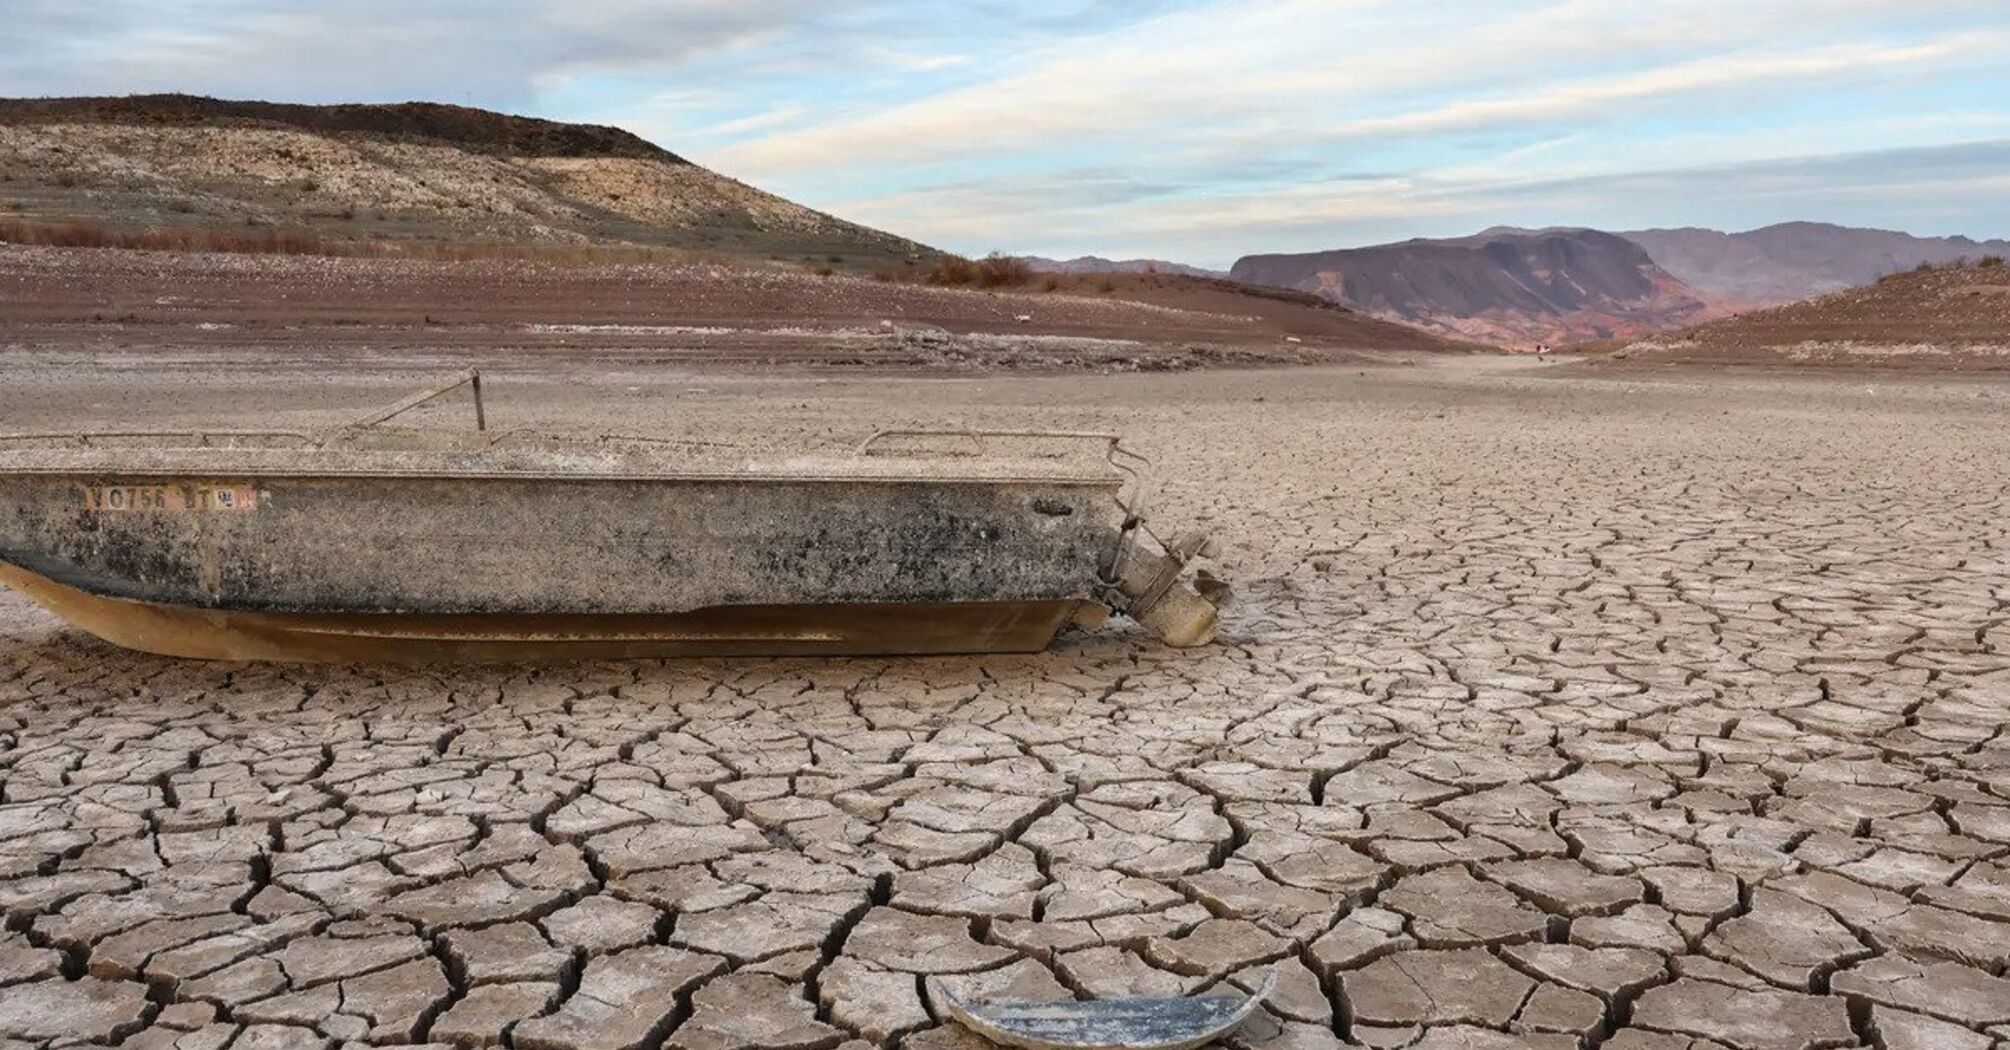 The Earth may face a megadrought lasting more than 20 years